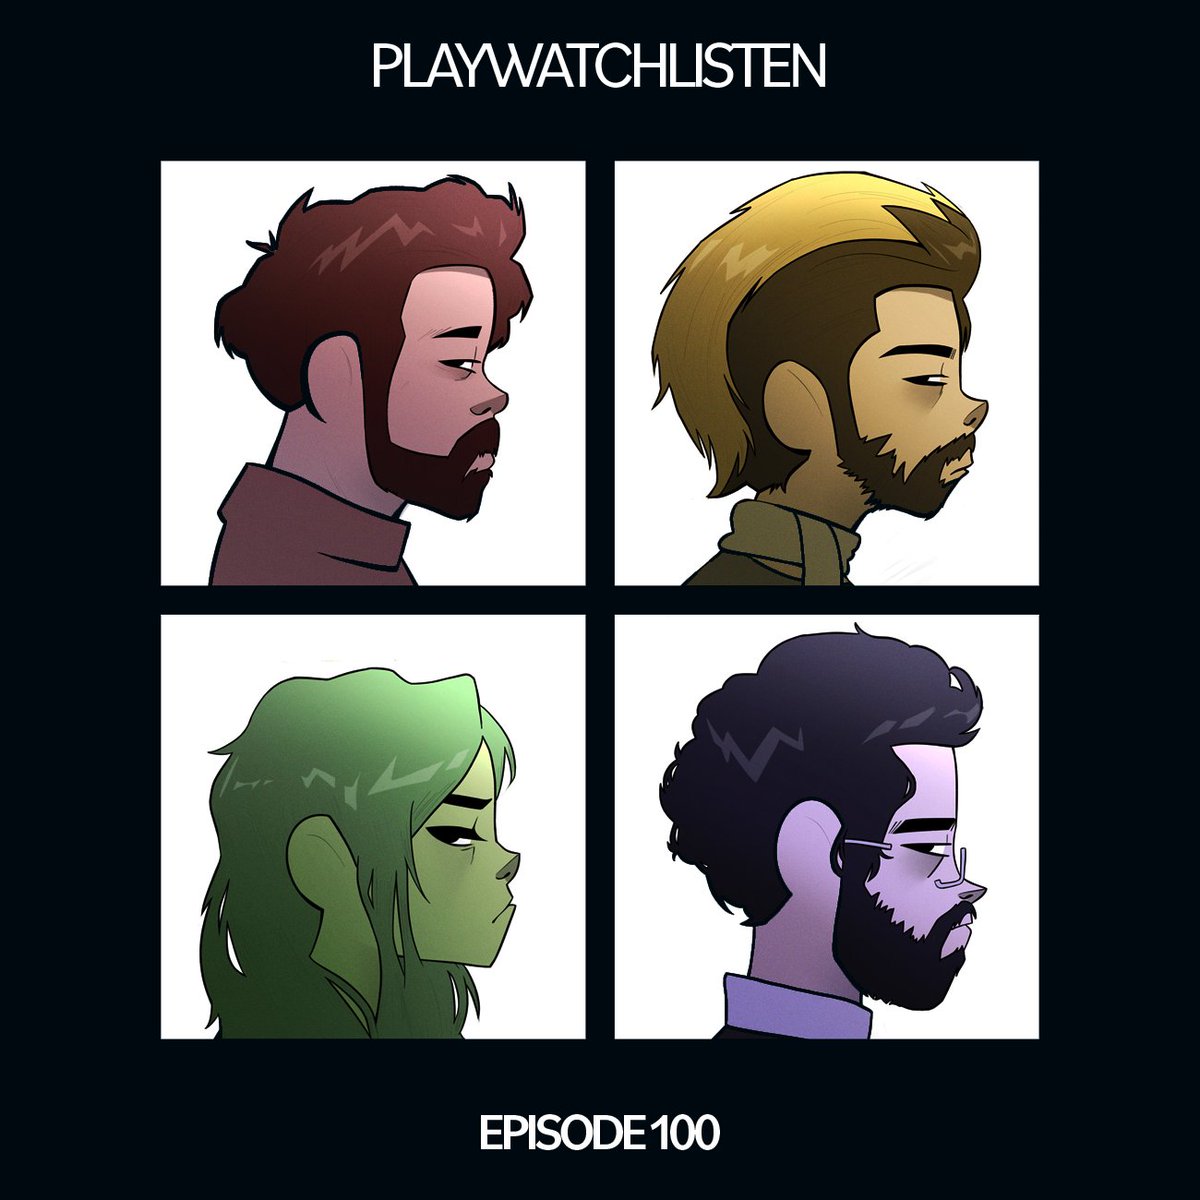 Congrats on the 100th episode!! I drew this based on the Demon Days album cuz I thought it'd be fun!😅✨ @PWL_Podcast @mikeBithell @TroyBakerVA @Charalanahzard @awintory  
.
.
.
TAGS!: #mikebithell #troybaker #alanahpearce #austinwintory #gorillaz #demondays